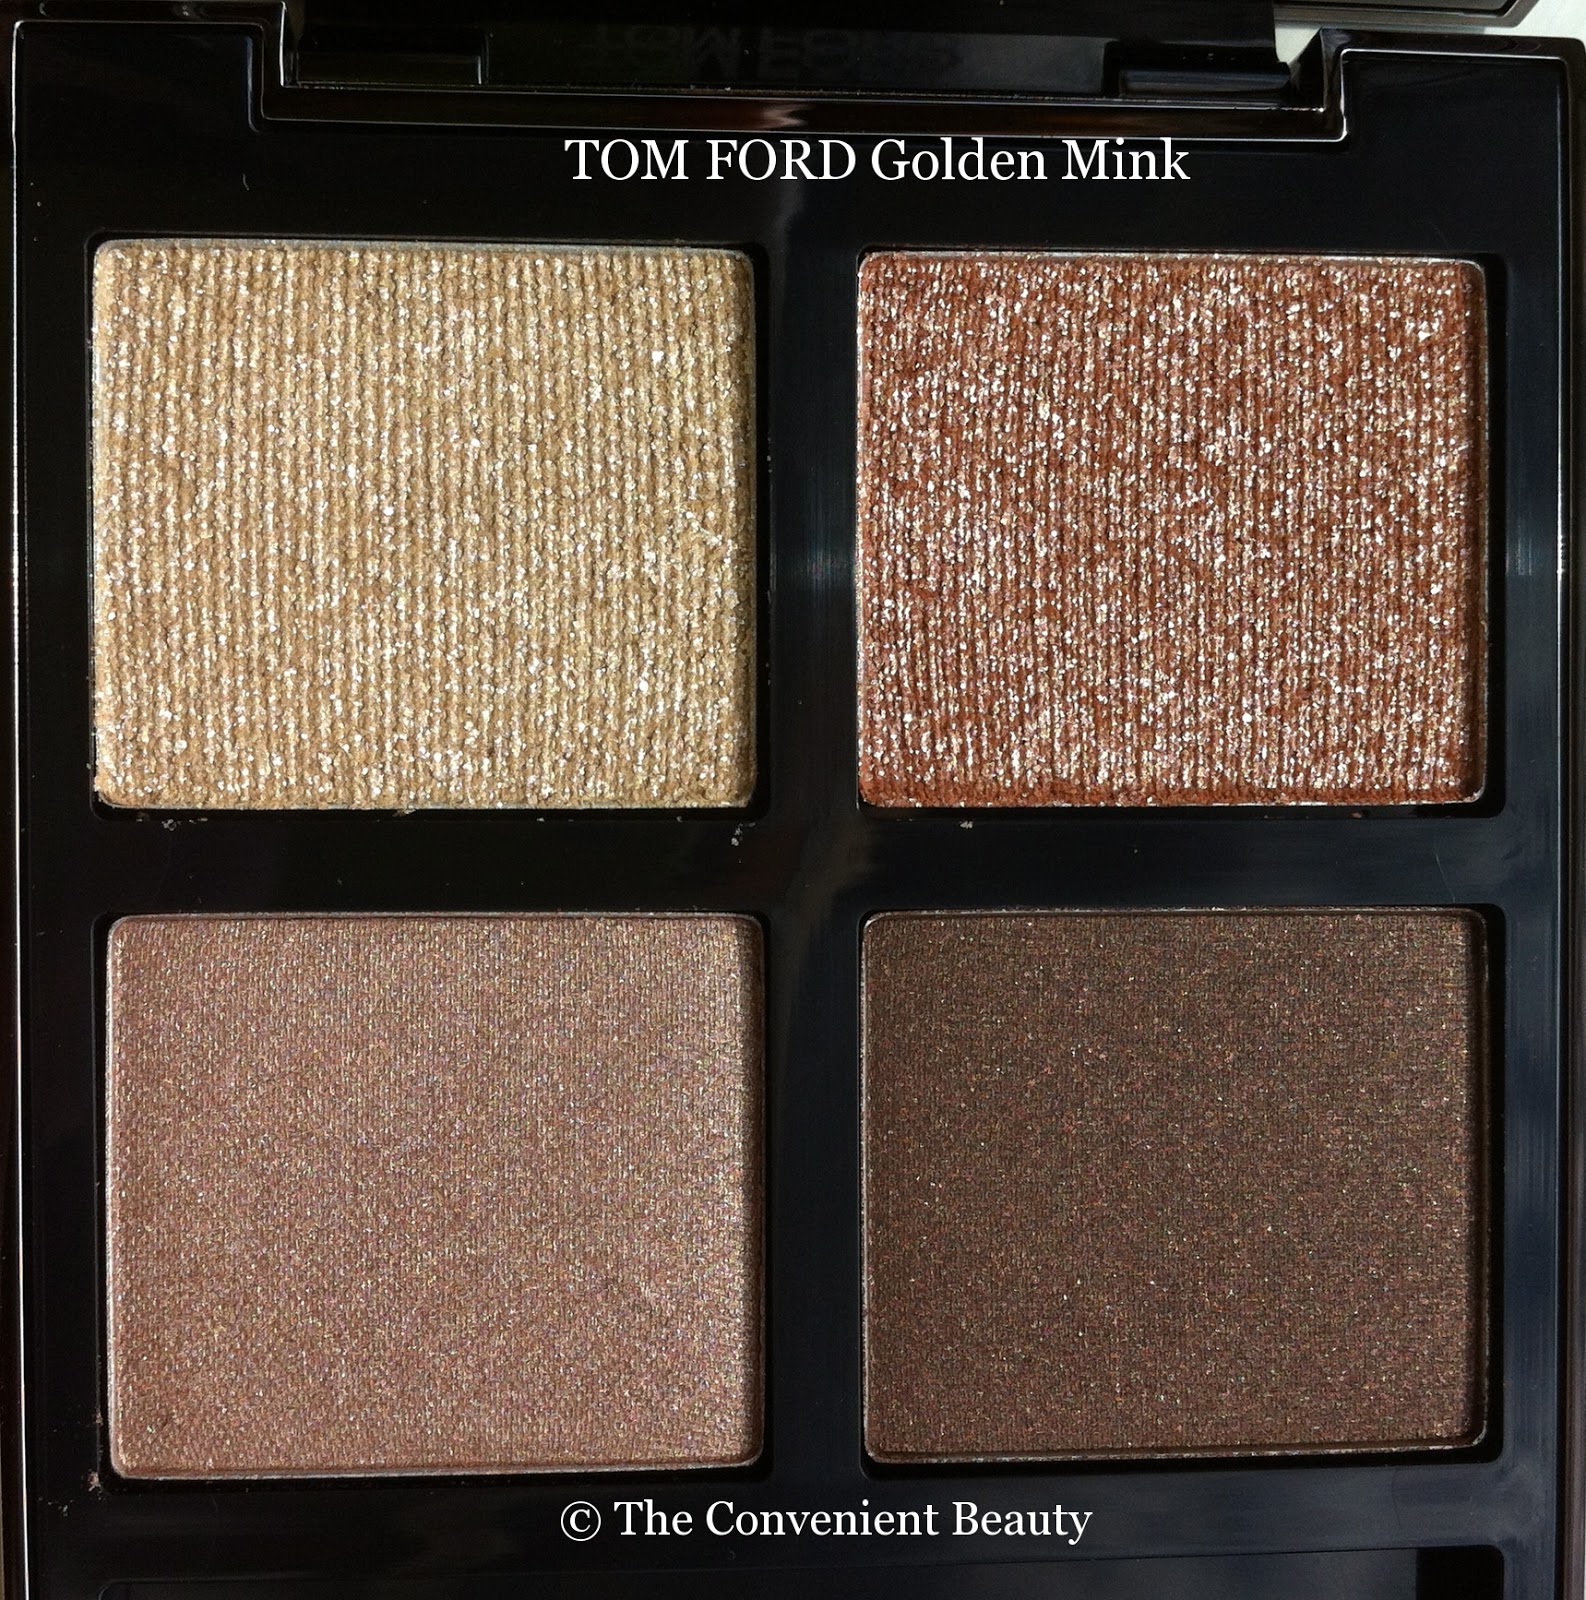 The Convenient Beauty: Review: Tom Ford Eyeshadow Quad 01 Golden Mink